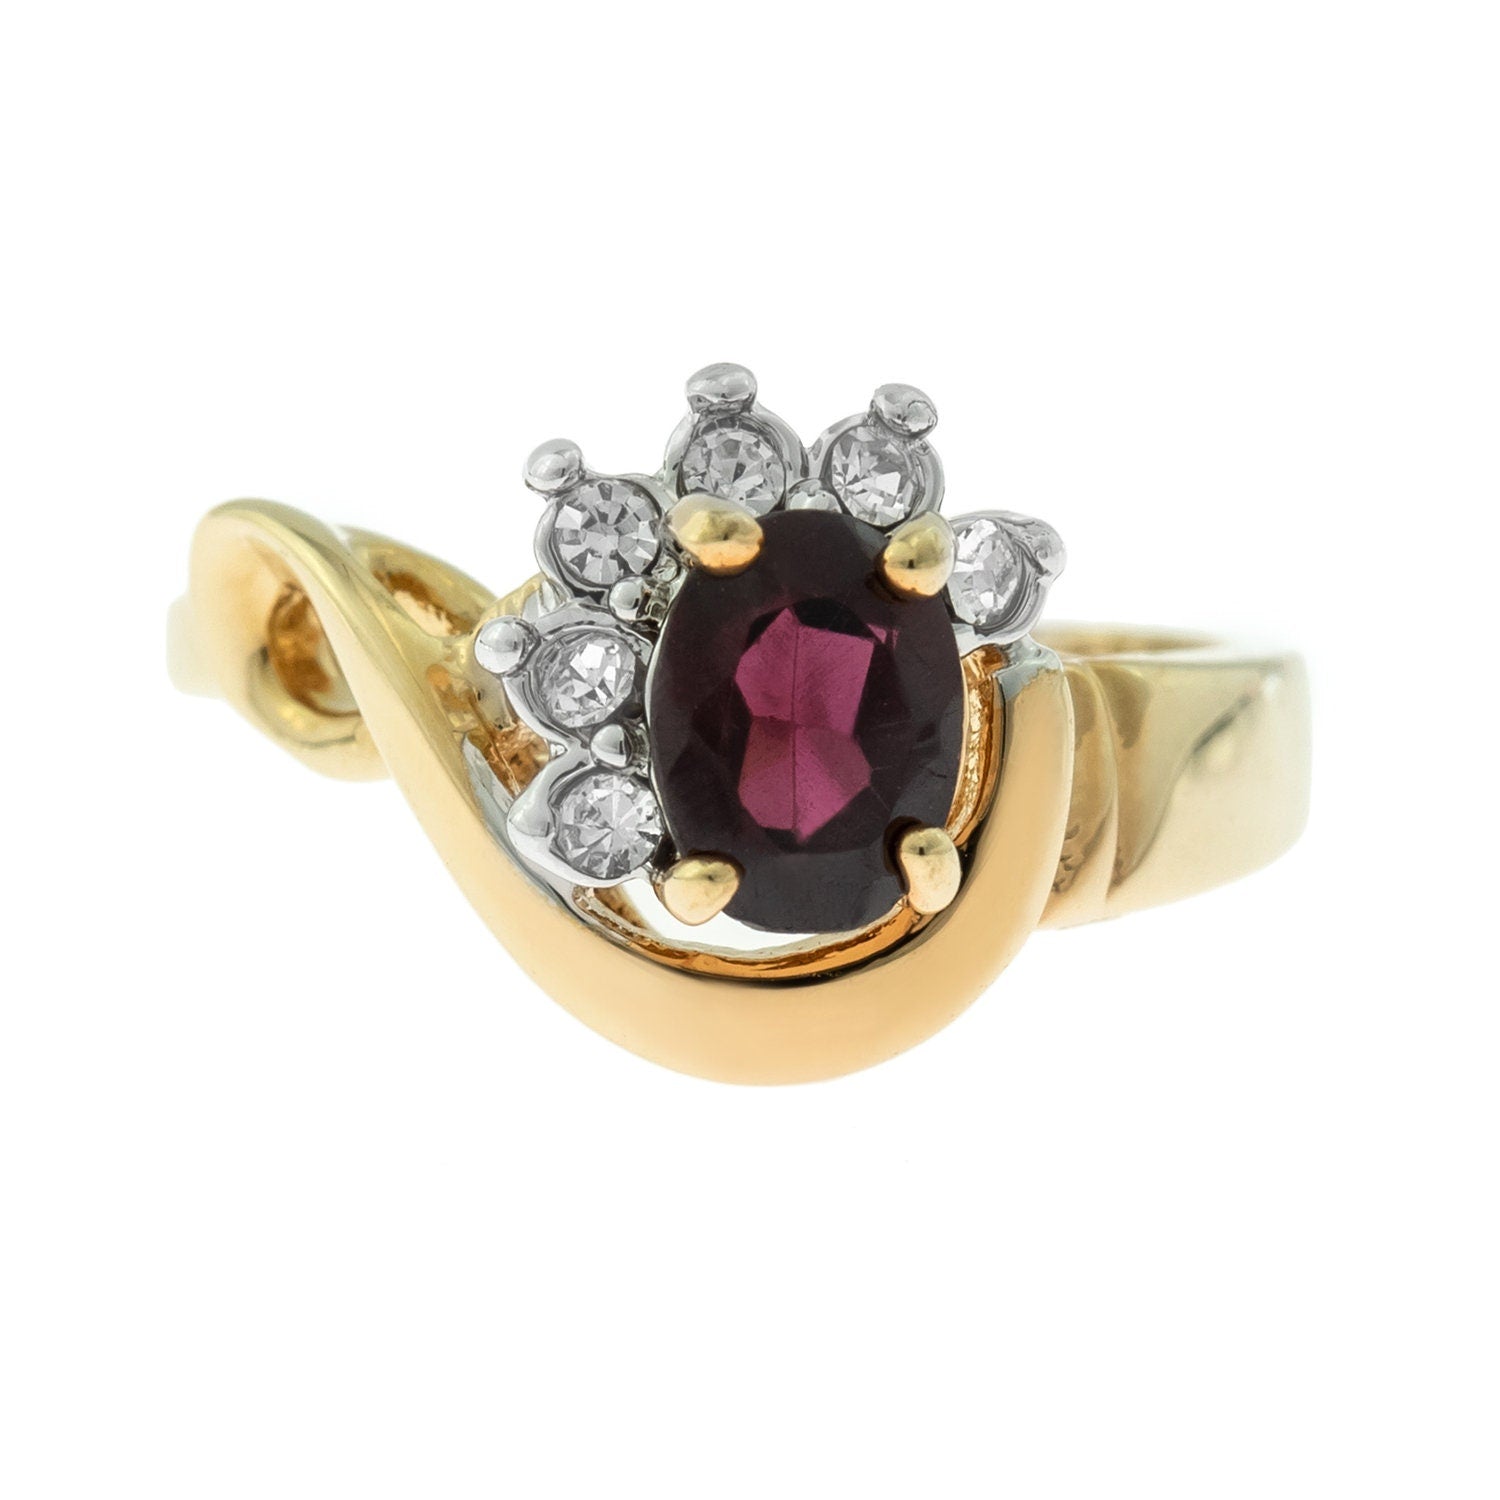 Vintage Ring Genuine Garnet and Clear Swarovski Crystals 18kt Gold Plated Size 7 only R2779 - Limited Stock - Never Worn